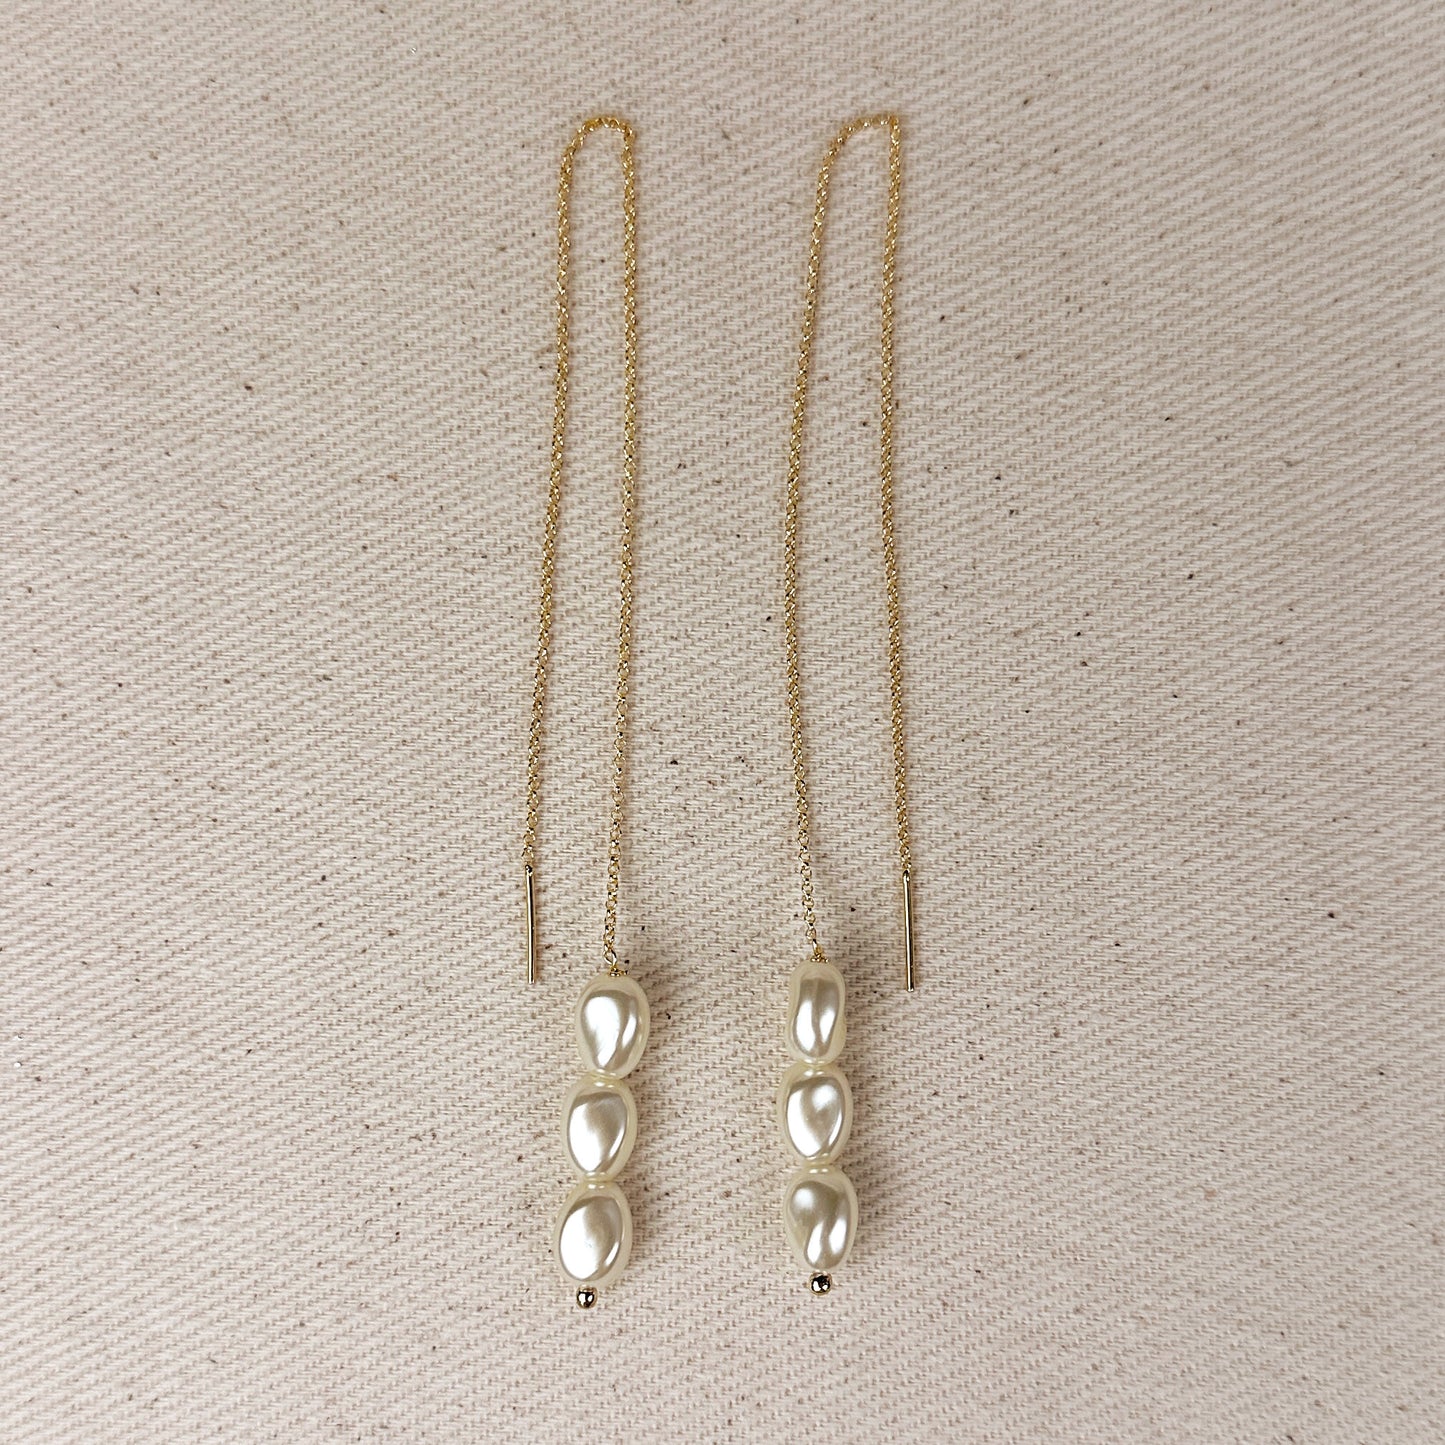 18k Gold Filled Row of Baroque Pearls Threader Earrings